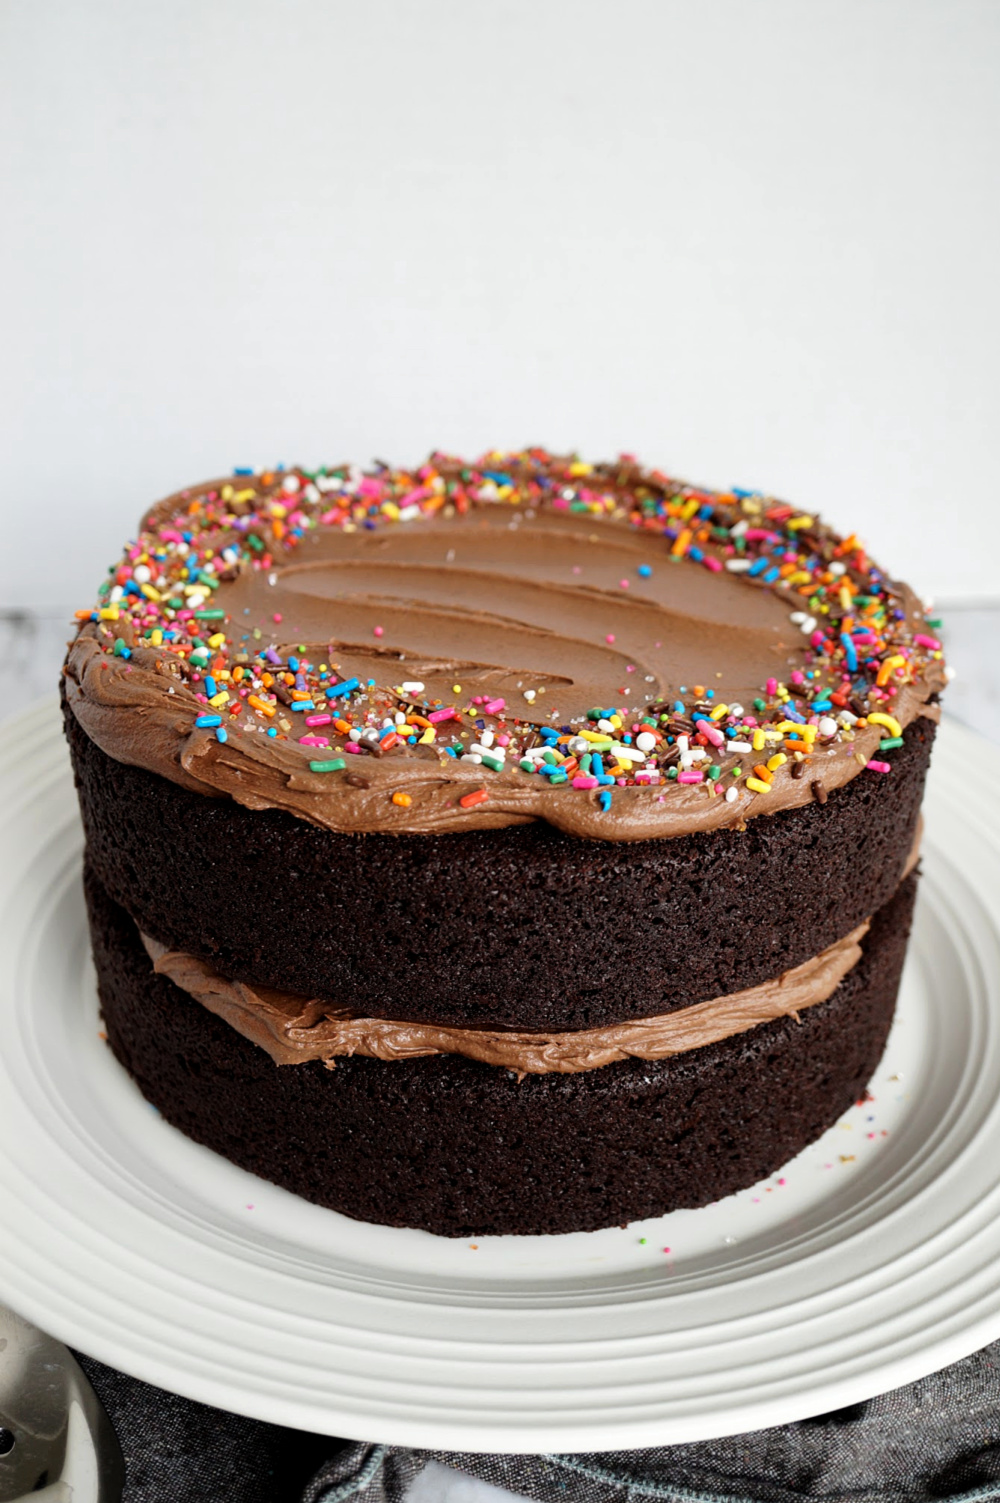 Fluffy Chocolate Cake Recipe That You Will Love! - BAKED by Blair